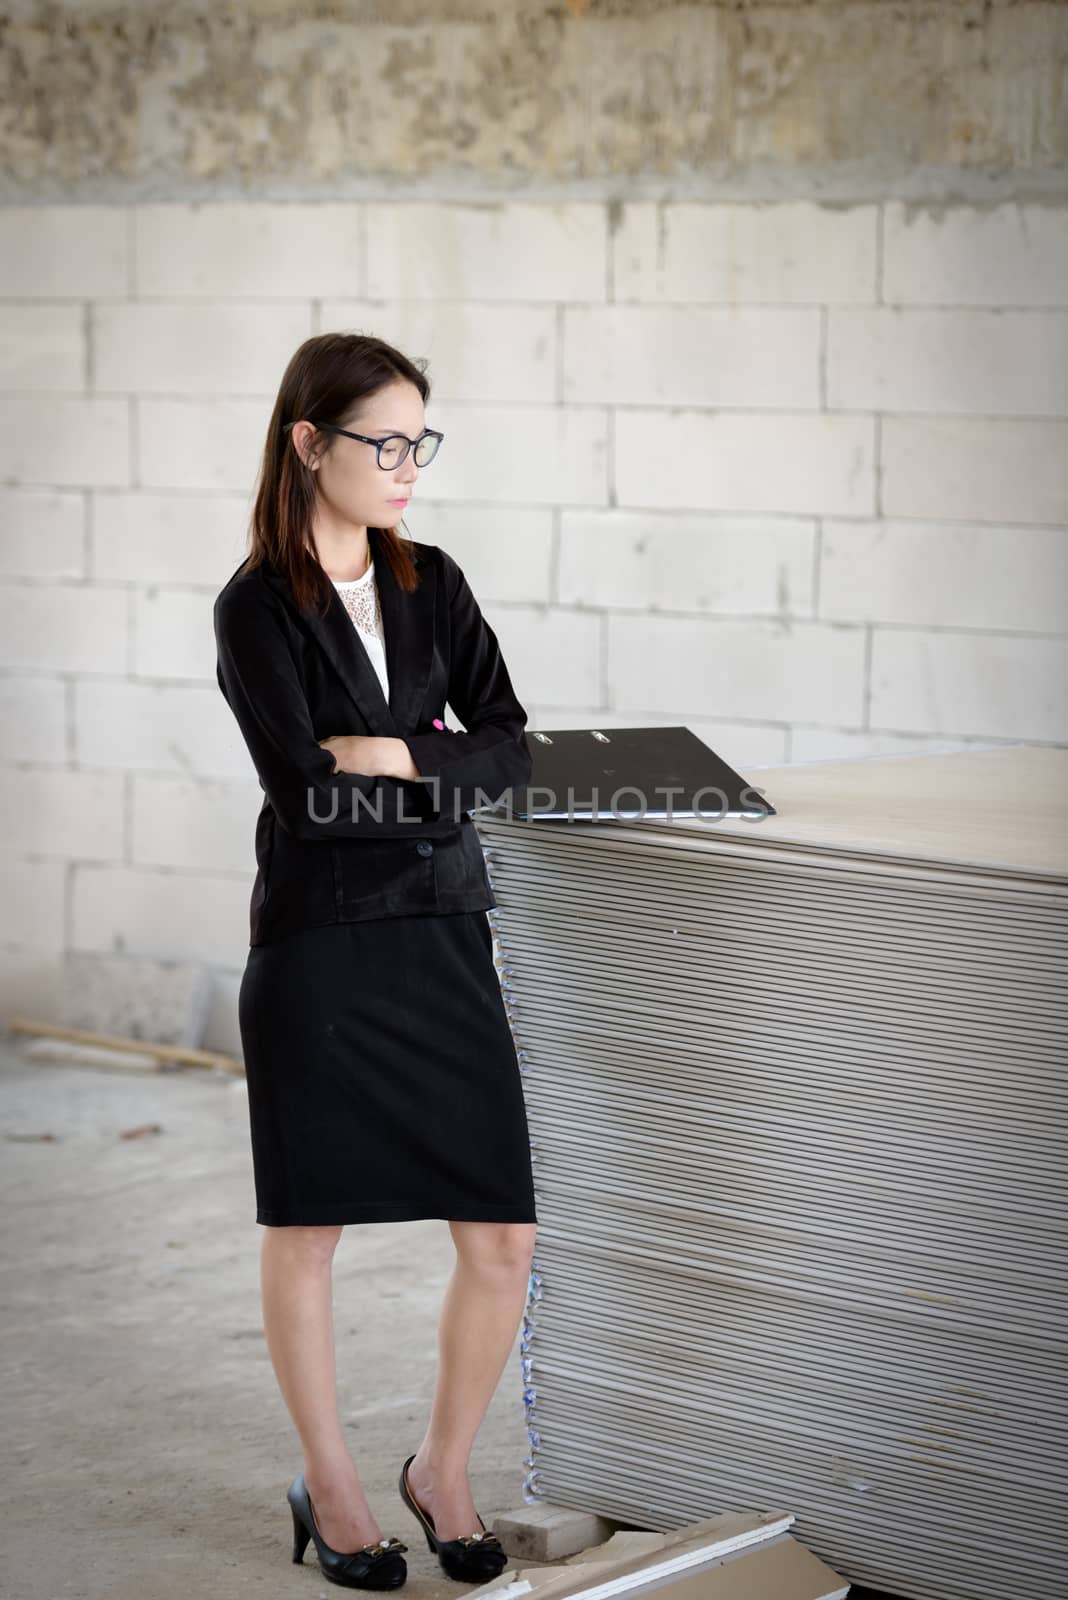 Business woman standing thoughtful in a building.